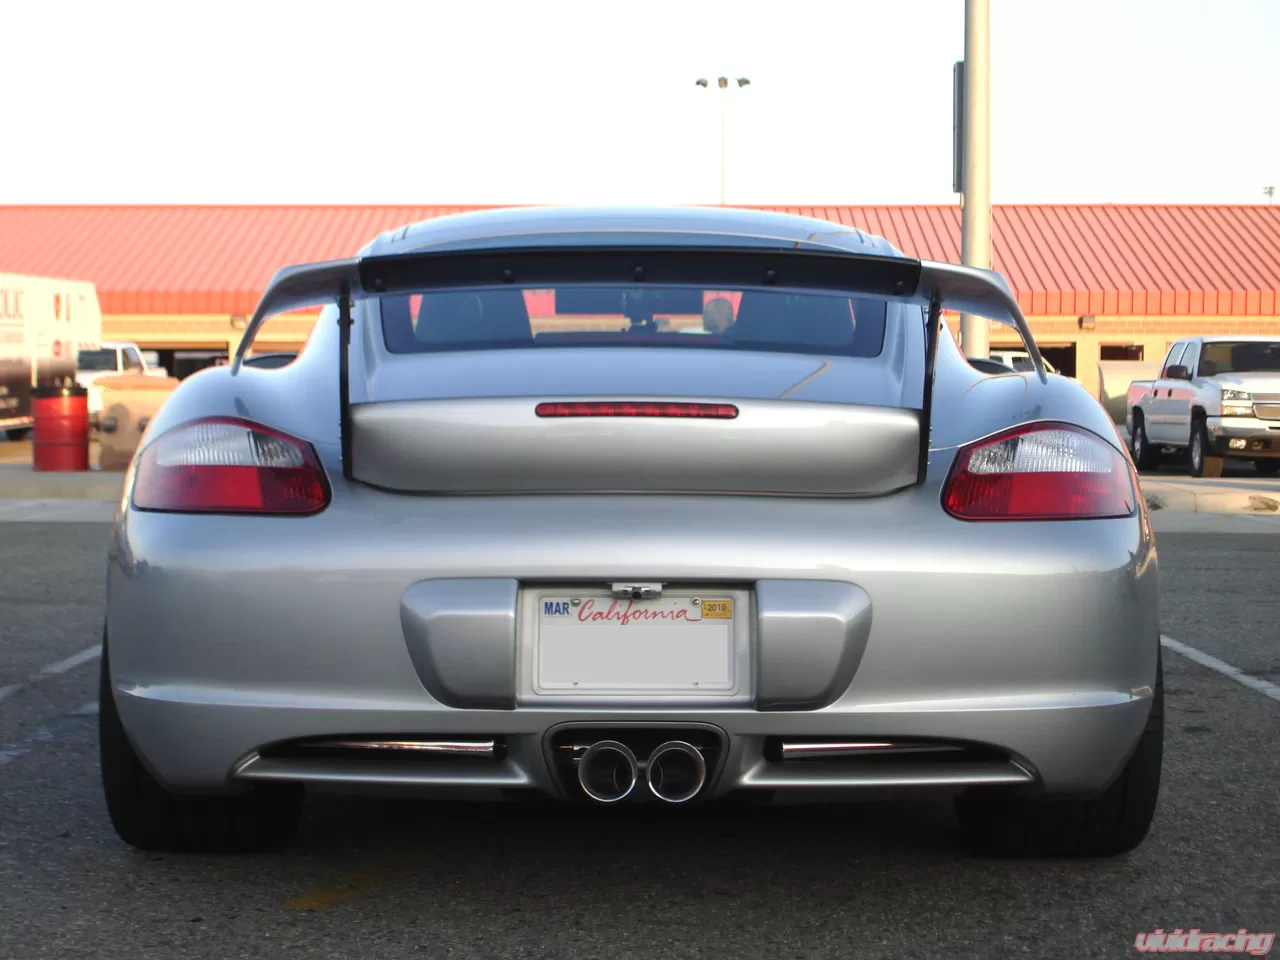 Agency Power Porsche Cayman Exhaust Fly By Video – So Sick! – Vivid ...